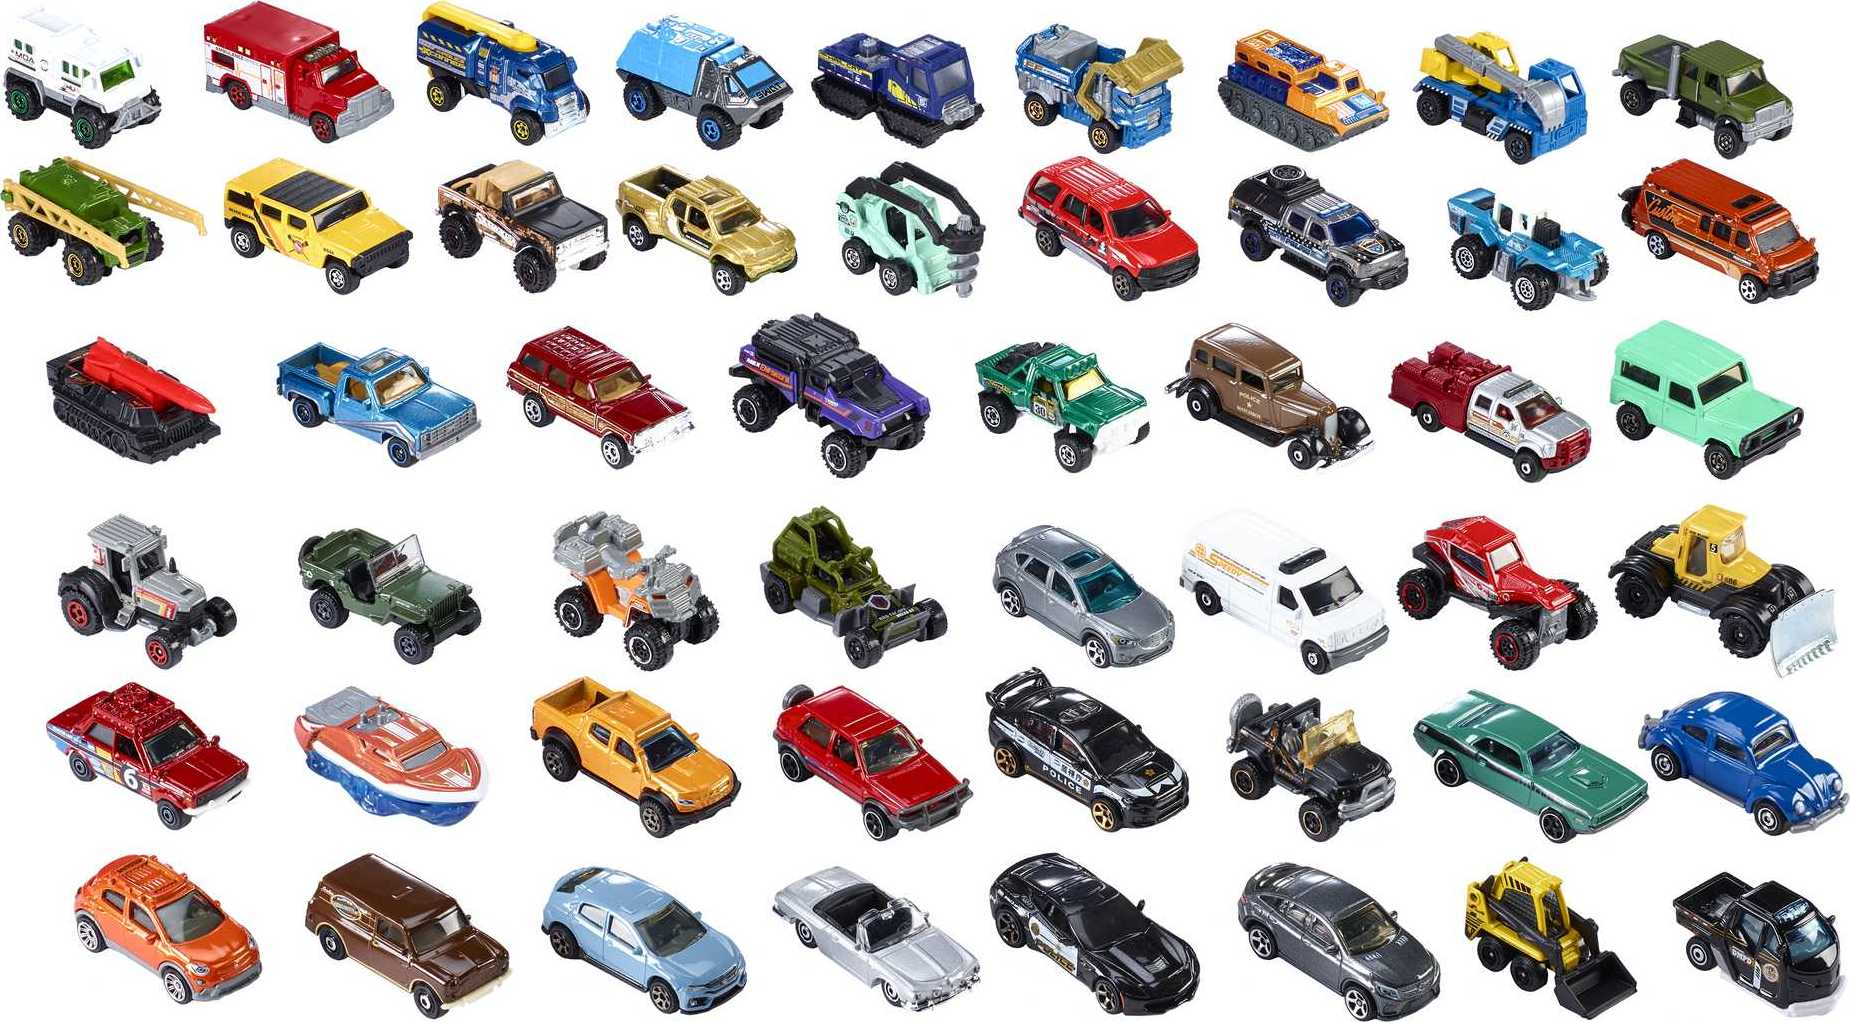 Matchbox Set of 50 Die-Cast Toy Cars or Trucks in 1:64 Scale (Styles May Vary) - image 1 of 5